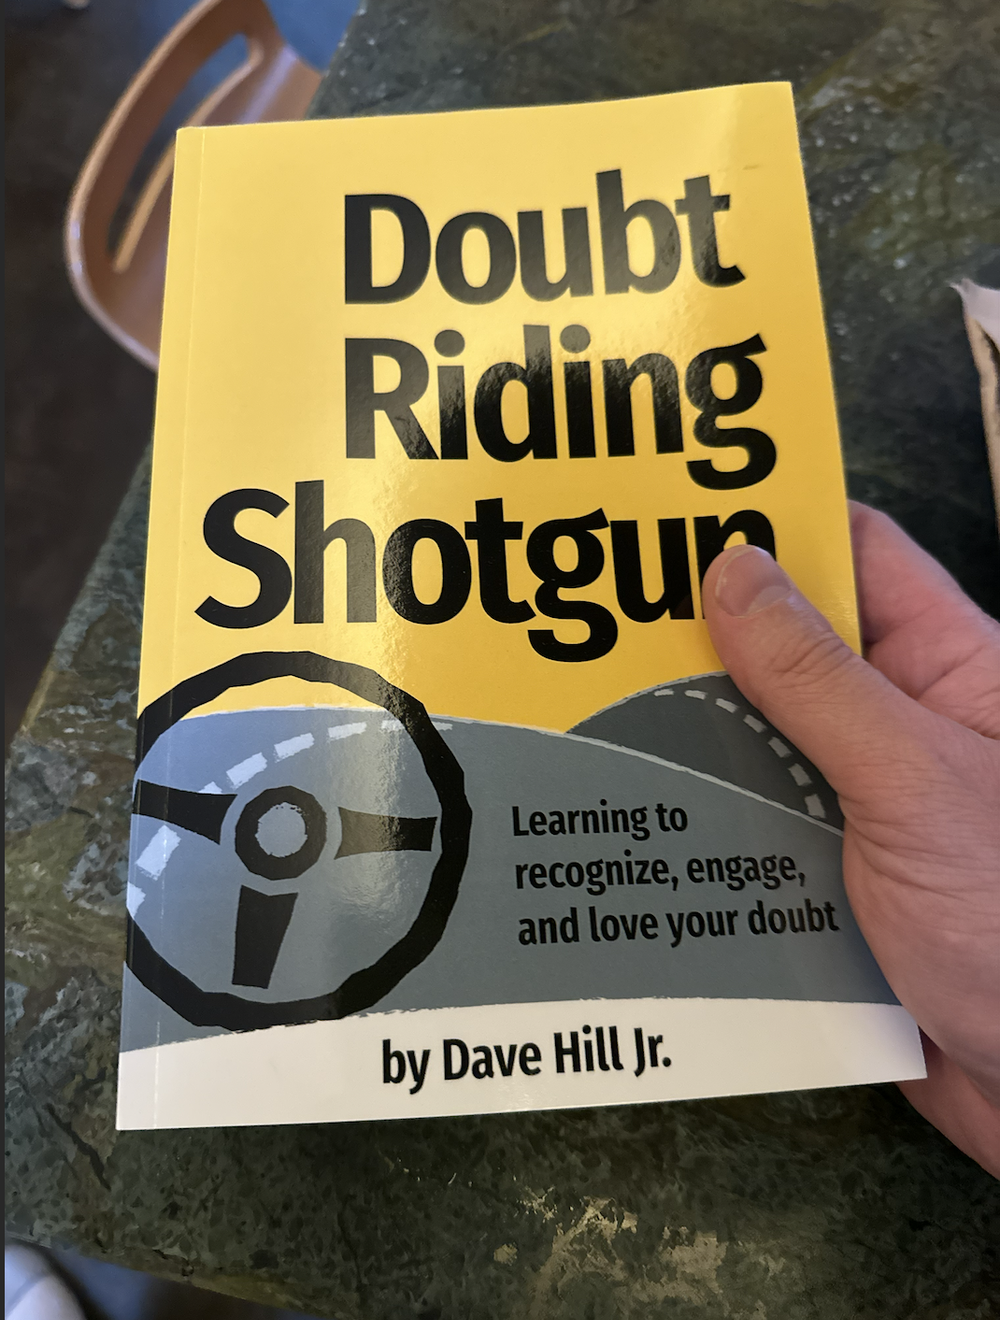 Ordered-my-copy-of-Dave-Hills-book-doubt-riding-shotgun.png